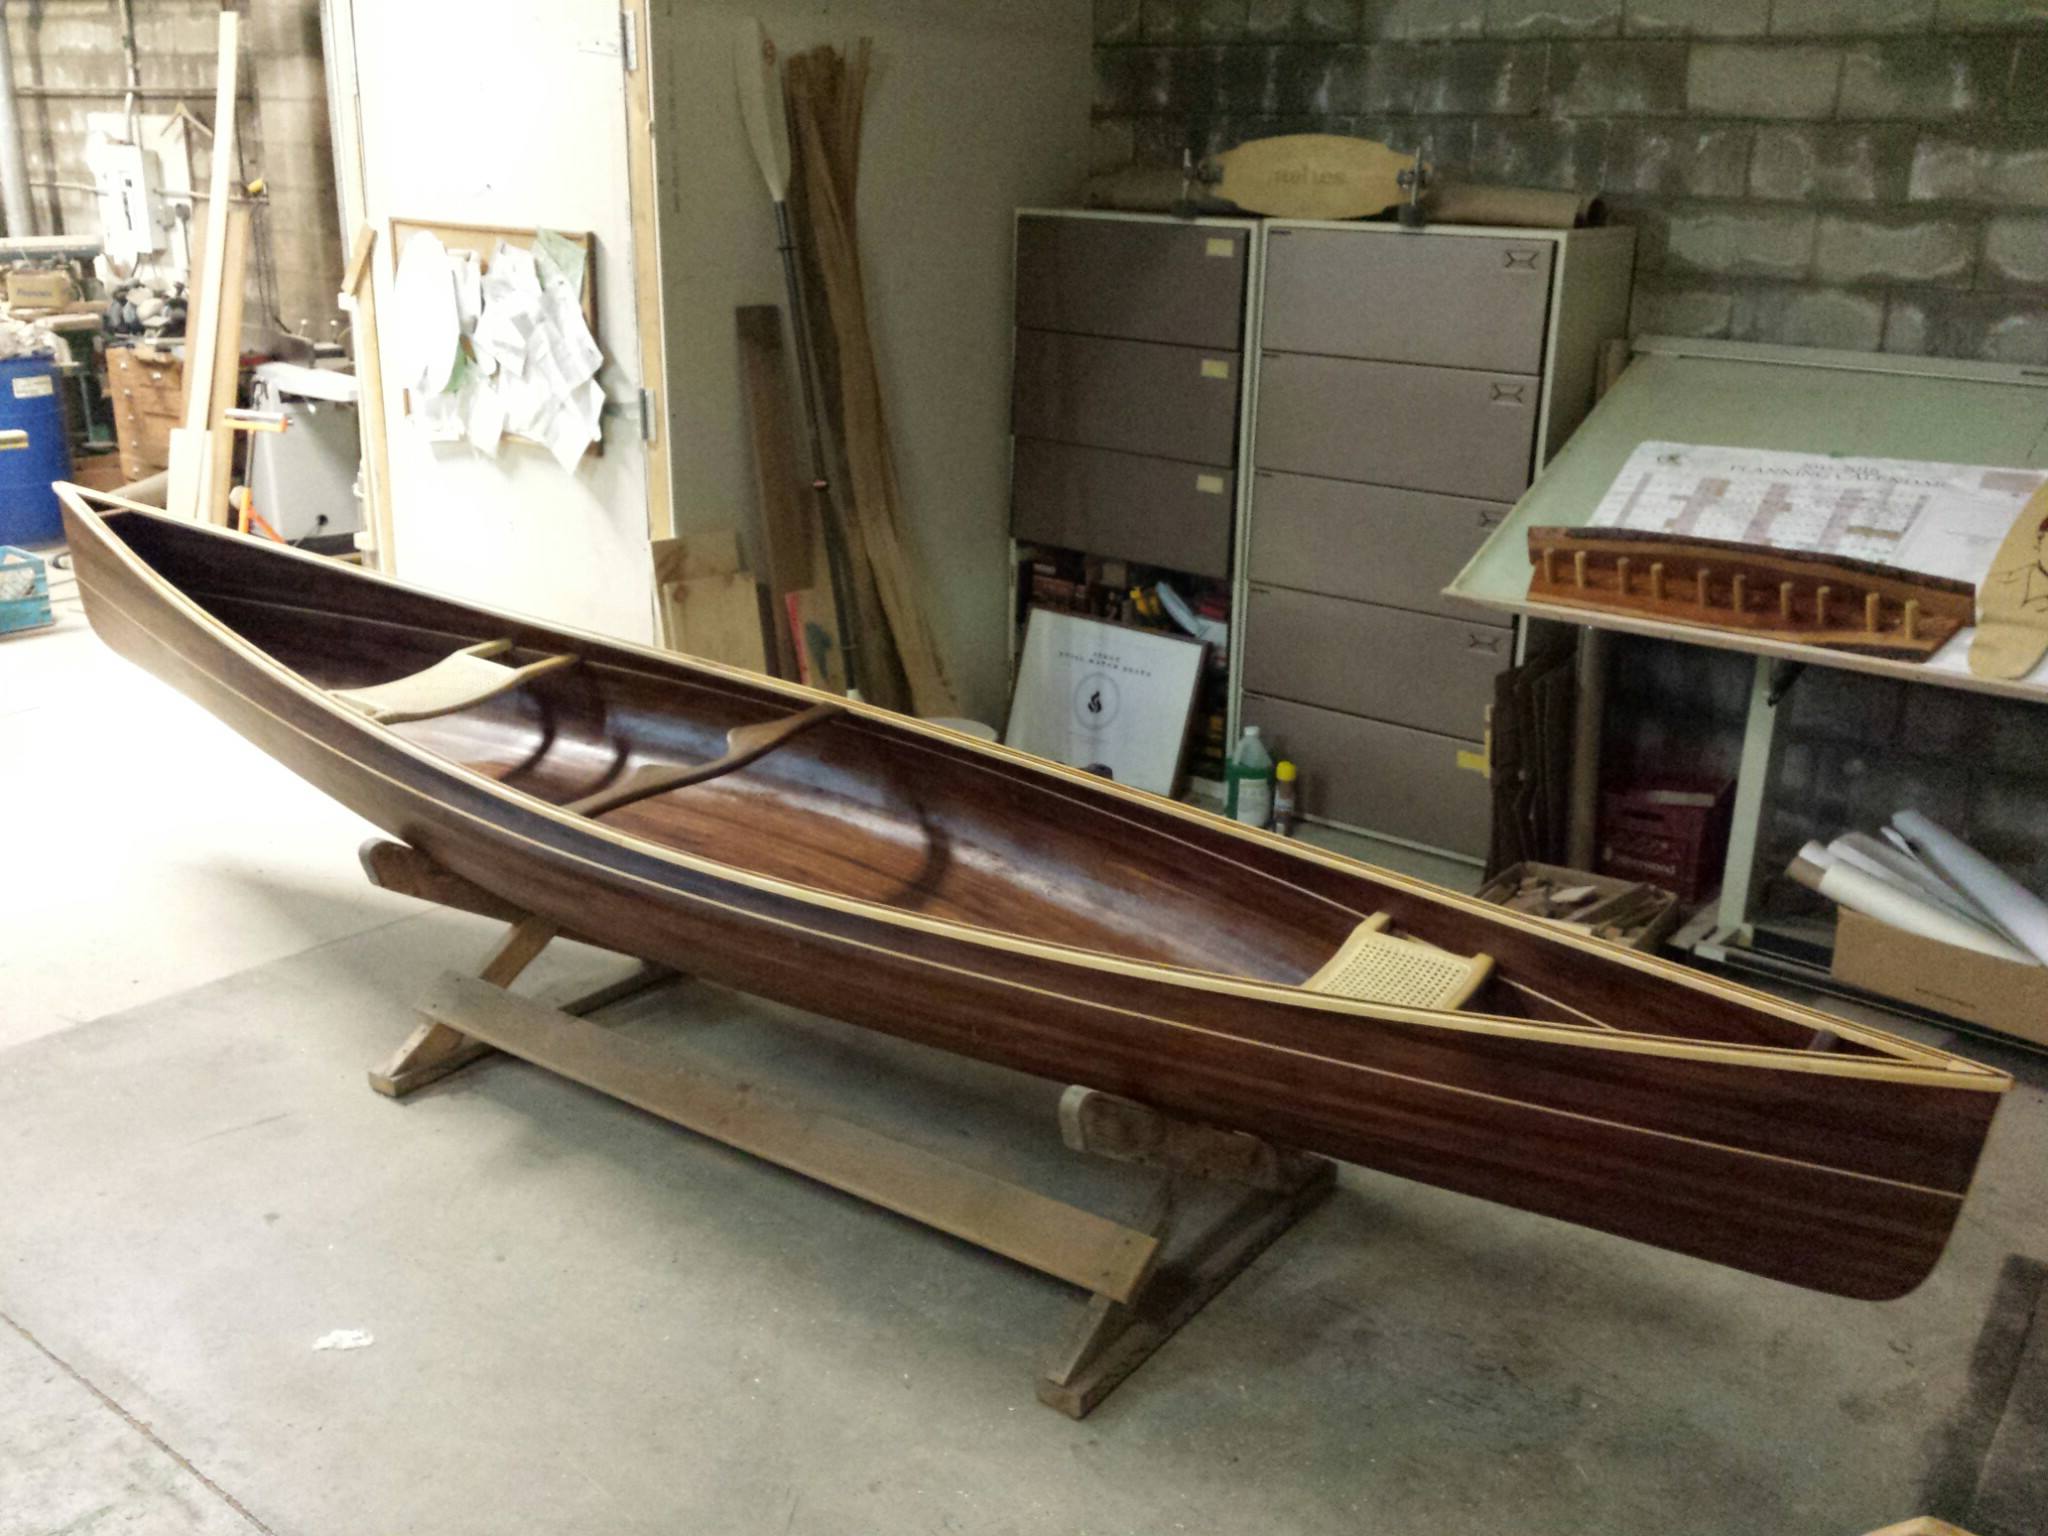 Canoe in the Wood Shop